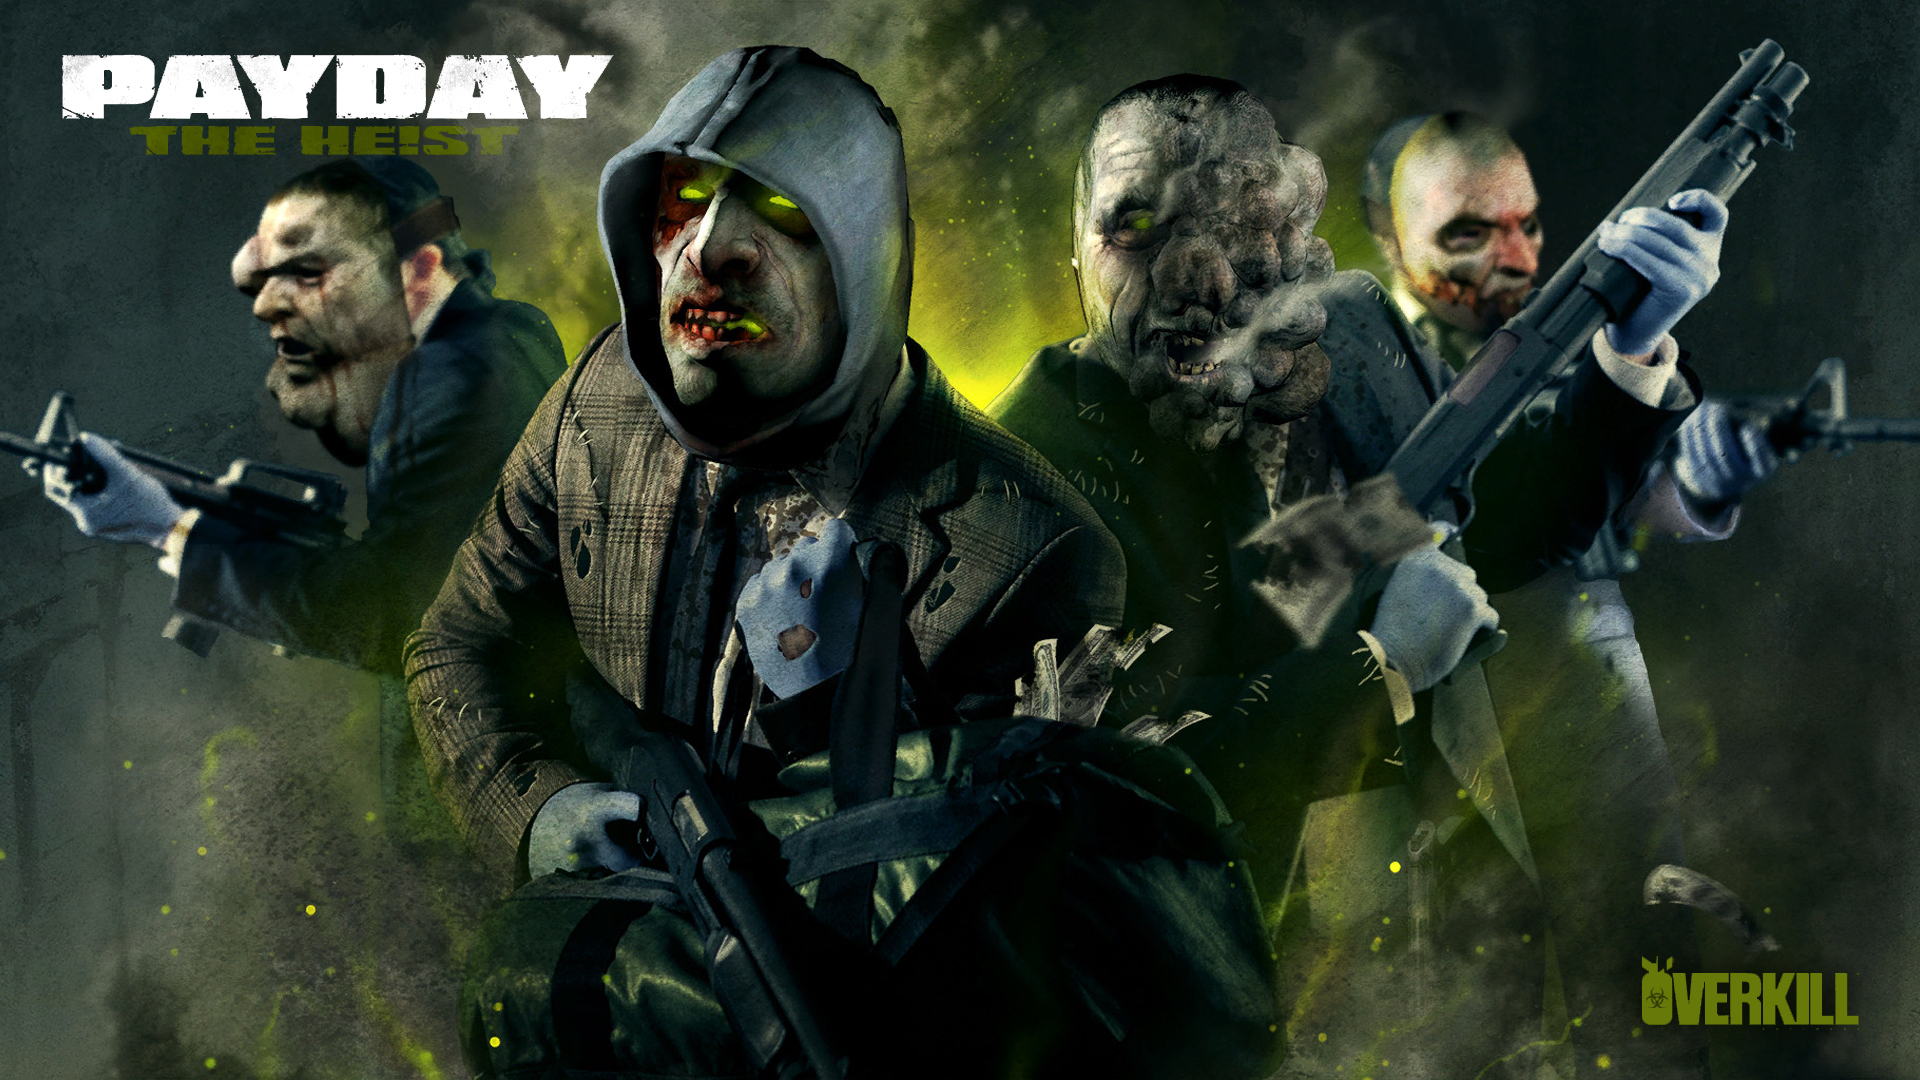 http://www.overkillsoftware.com/wp-content/uploads/2012/04/payday_the_heist_zombie_the_crew.jpg